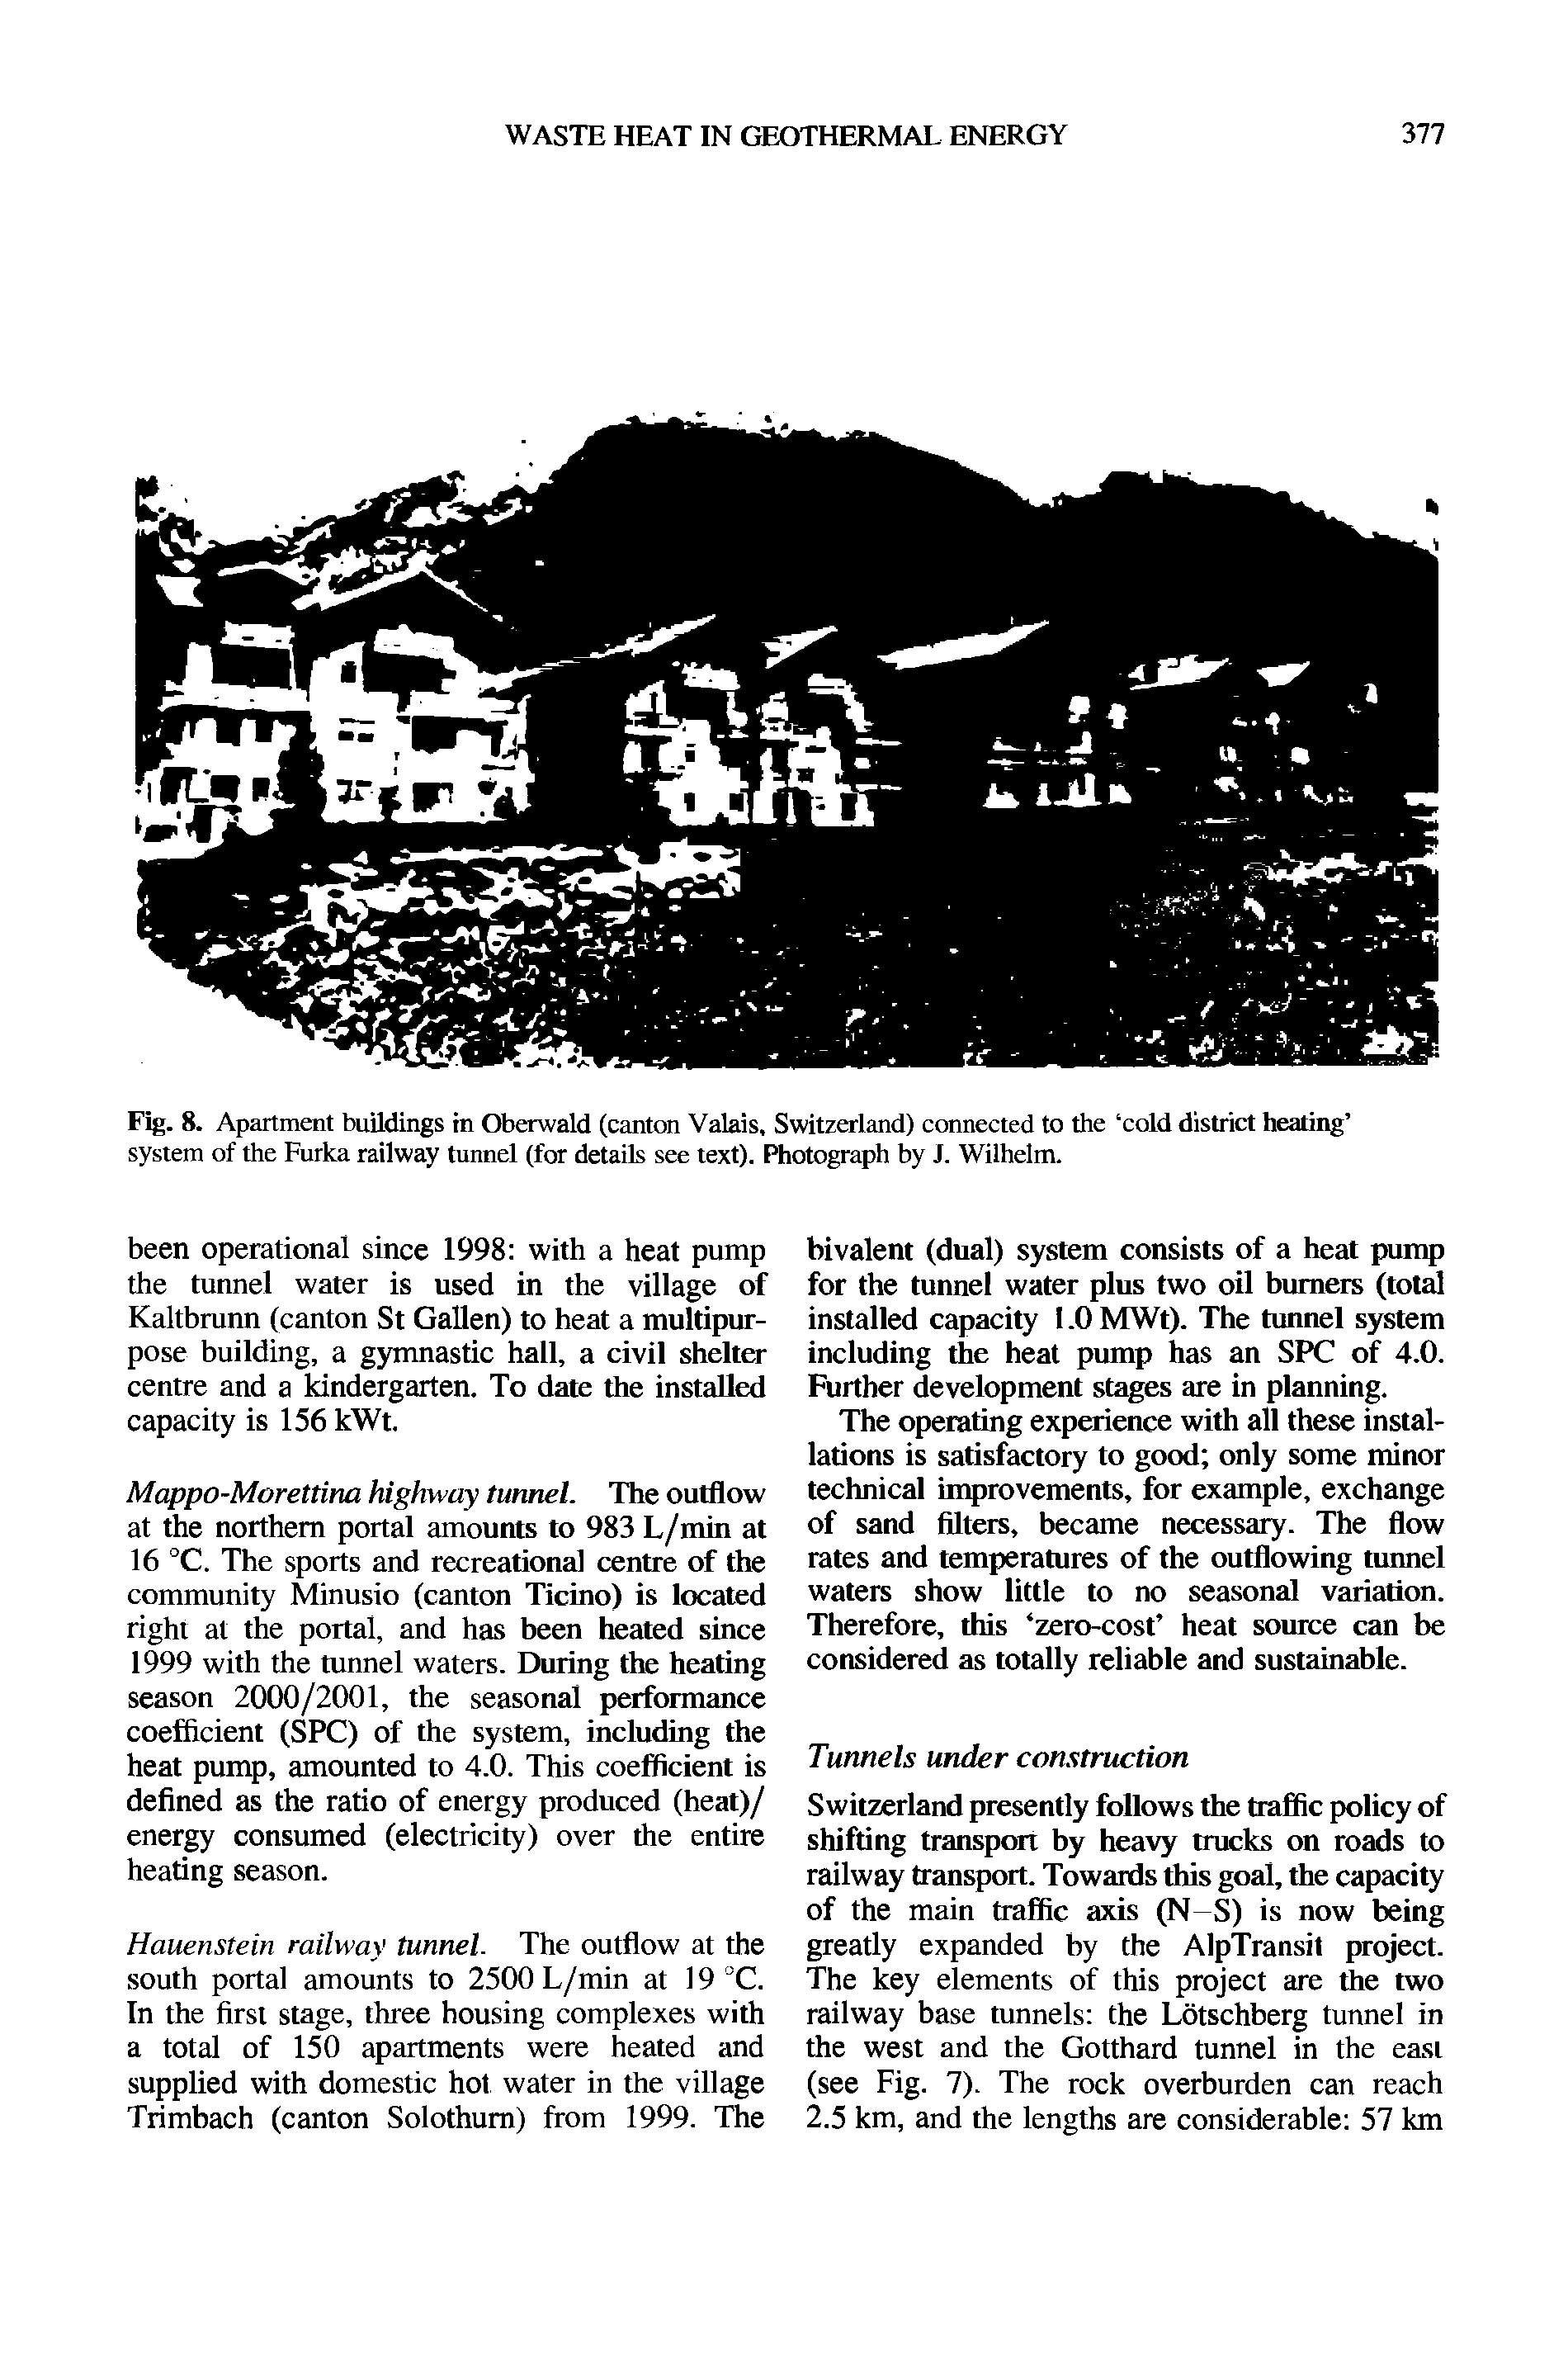 Fig. 8. Apartment buildings in Oberwald (canton Valais, Switzerland) connected to the cold district heating system of the Furka railway tunnel (for details see text). Photograph by J. Wilhelm.